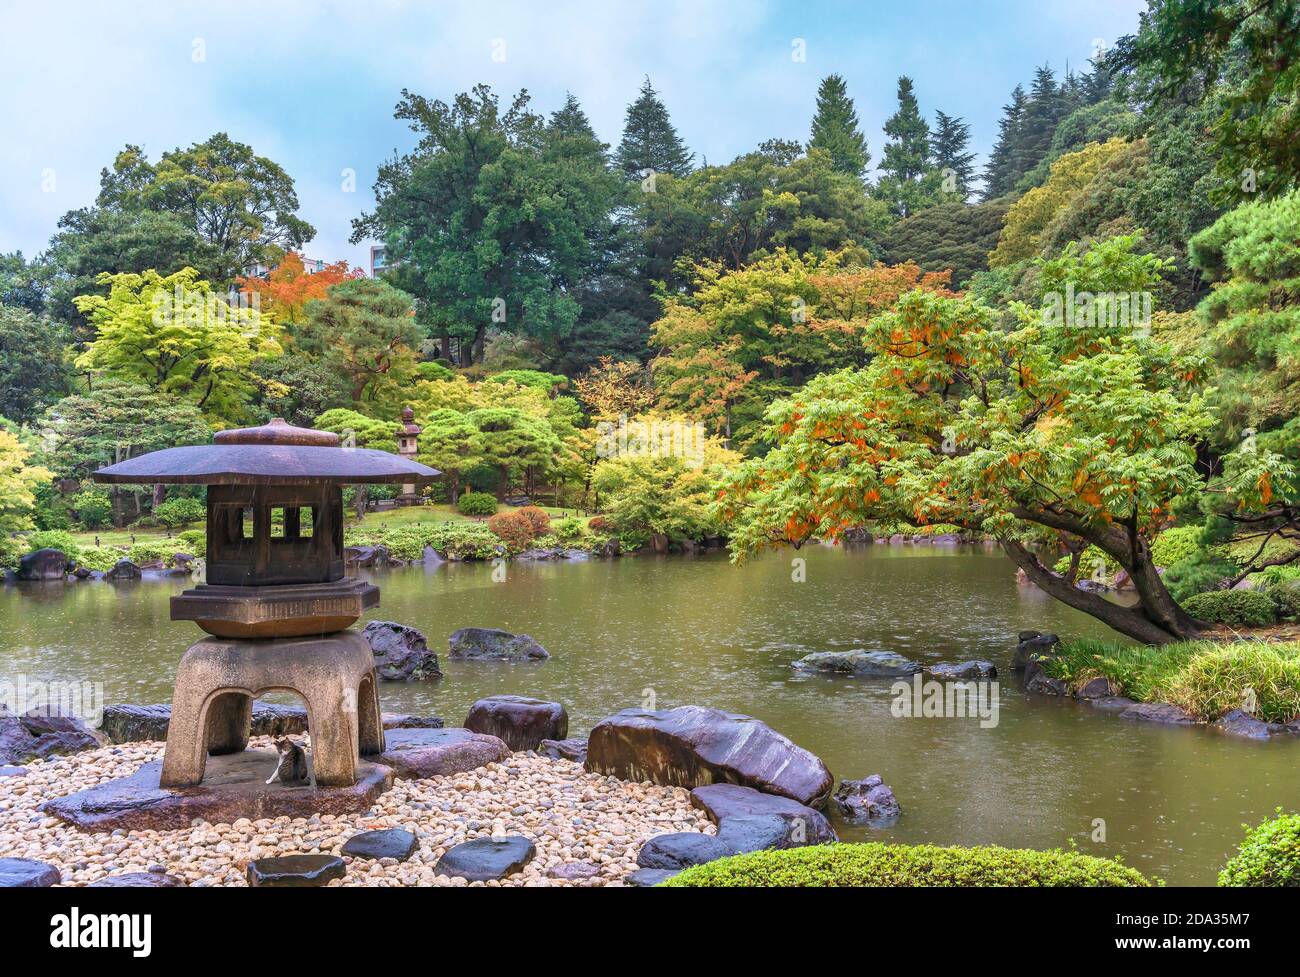 tokyo, japan - october 29 2020: Cat sheltering from the autumn rain under a Yukimi stone lantern at the edge of the pond of the Japanese garden design Stock Photo